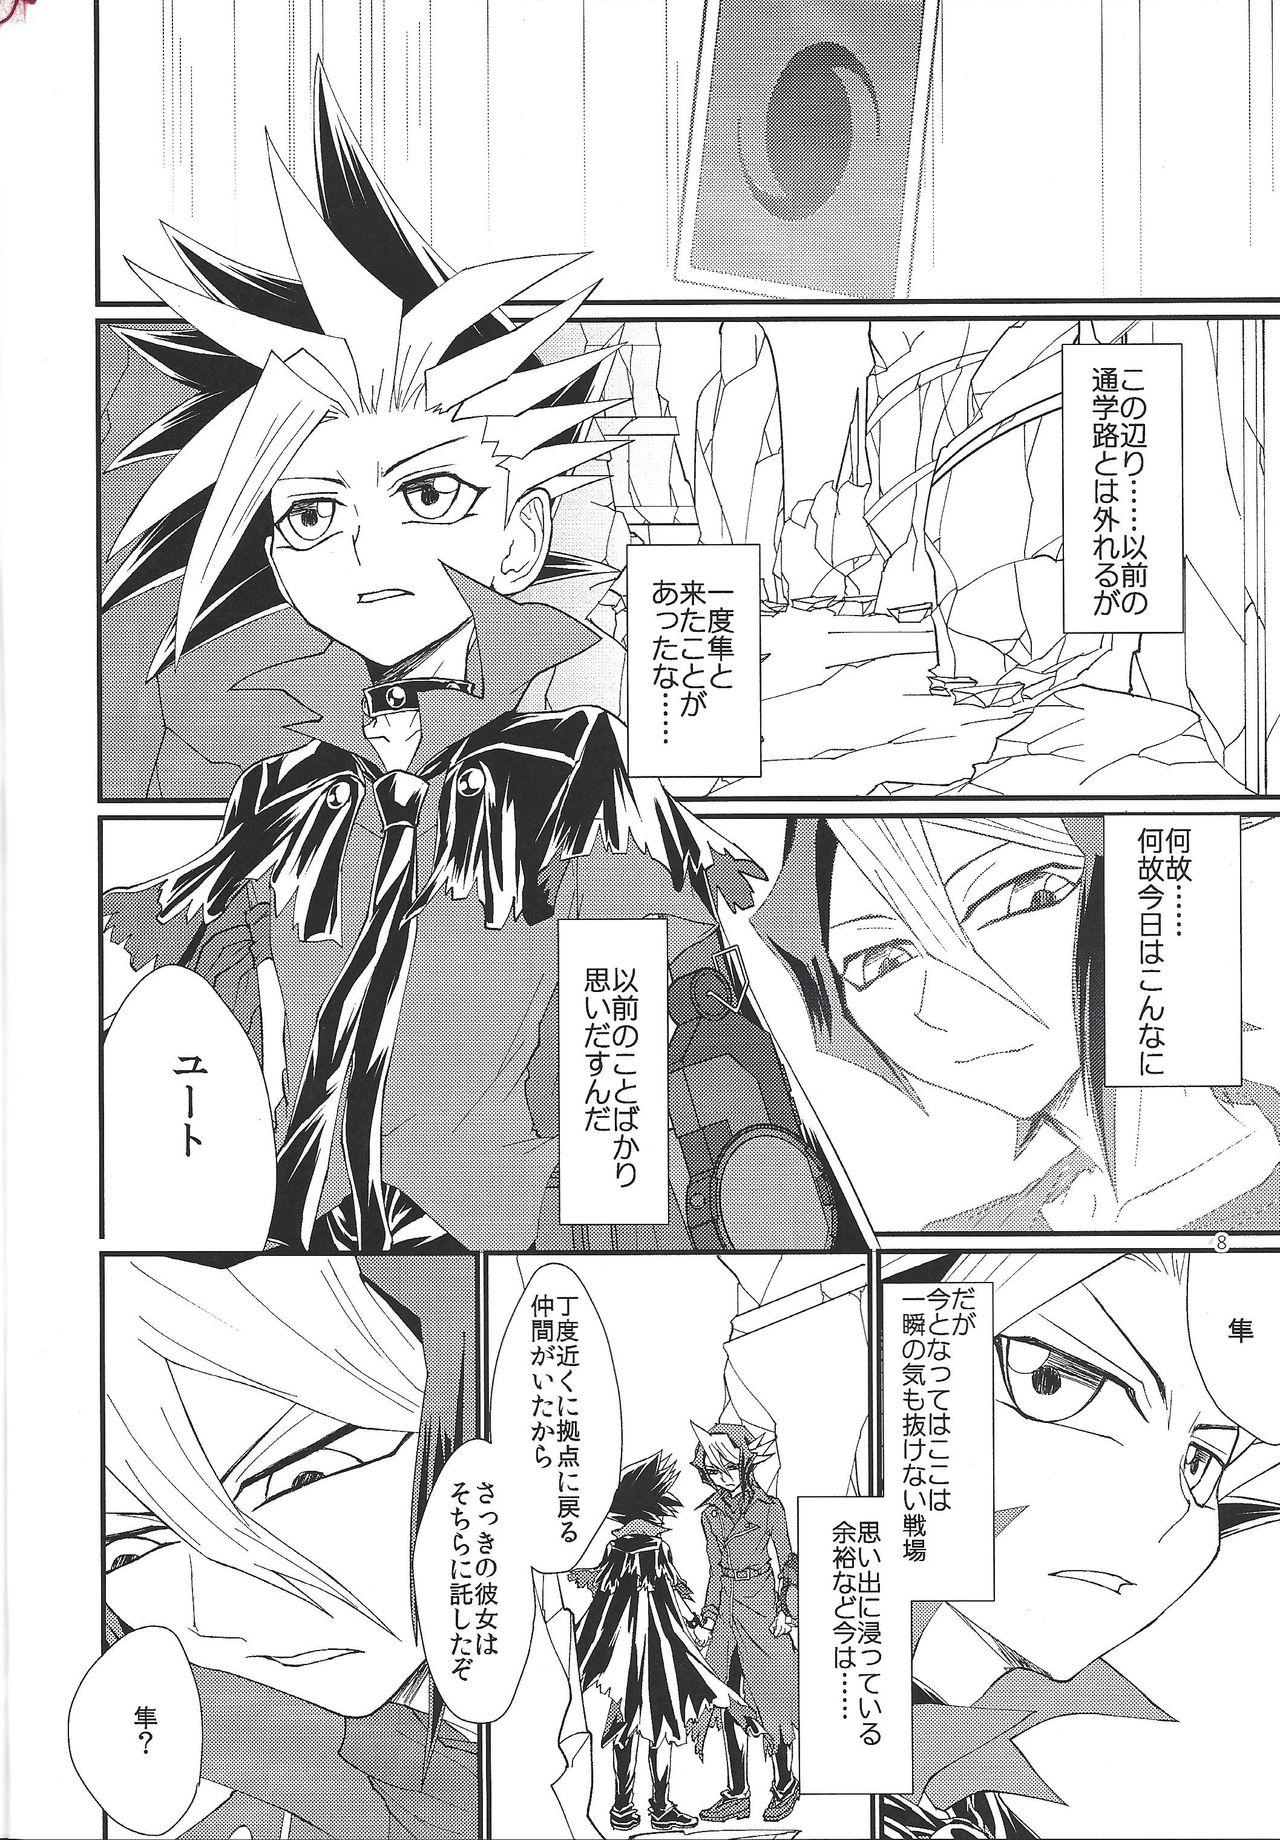 Transsexual Date - Yu-gi-oh arc-v Viet - Page 7